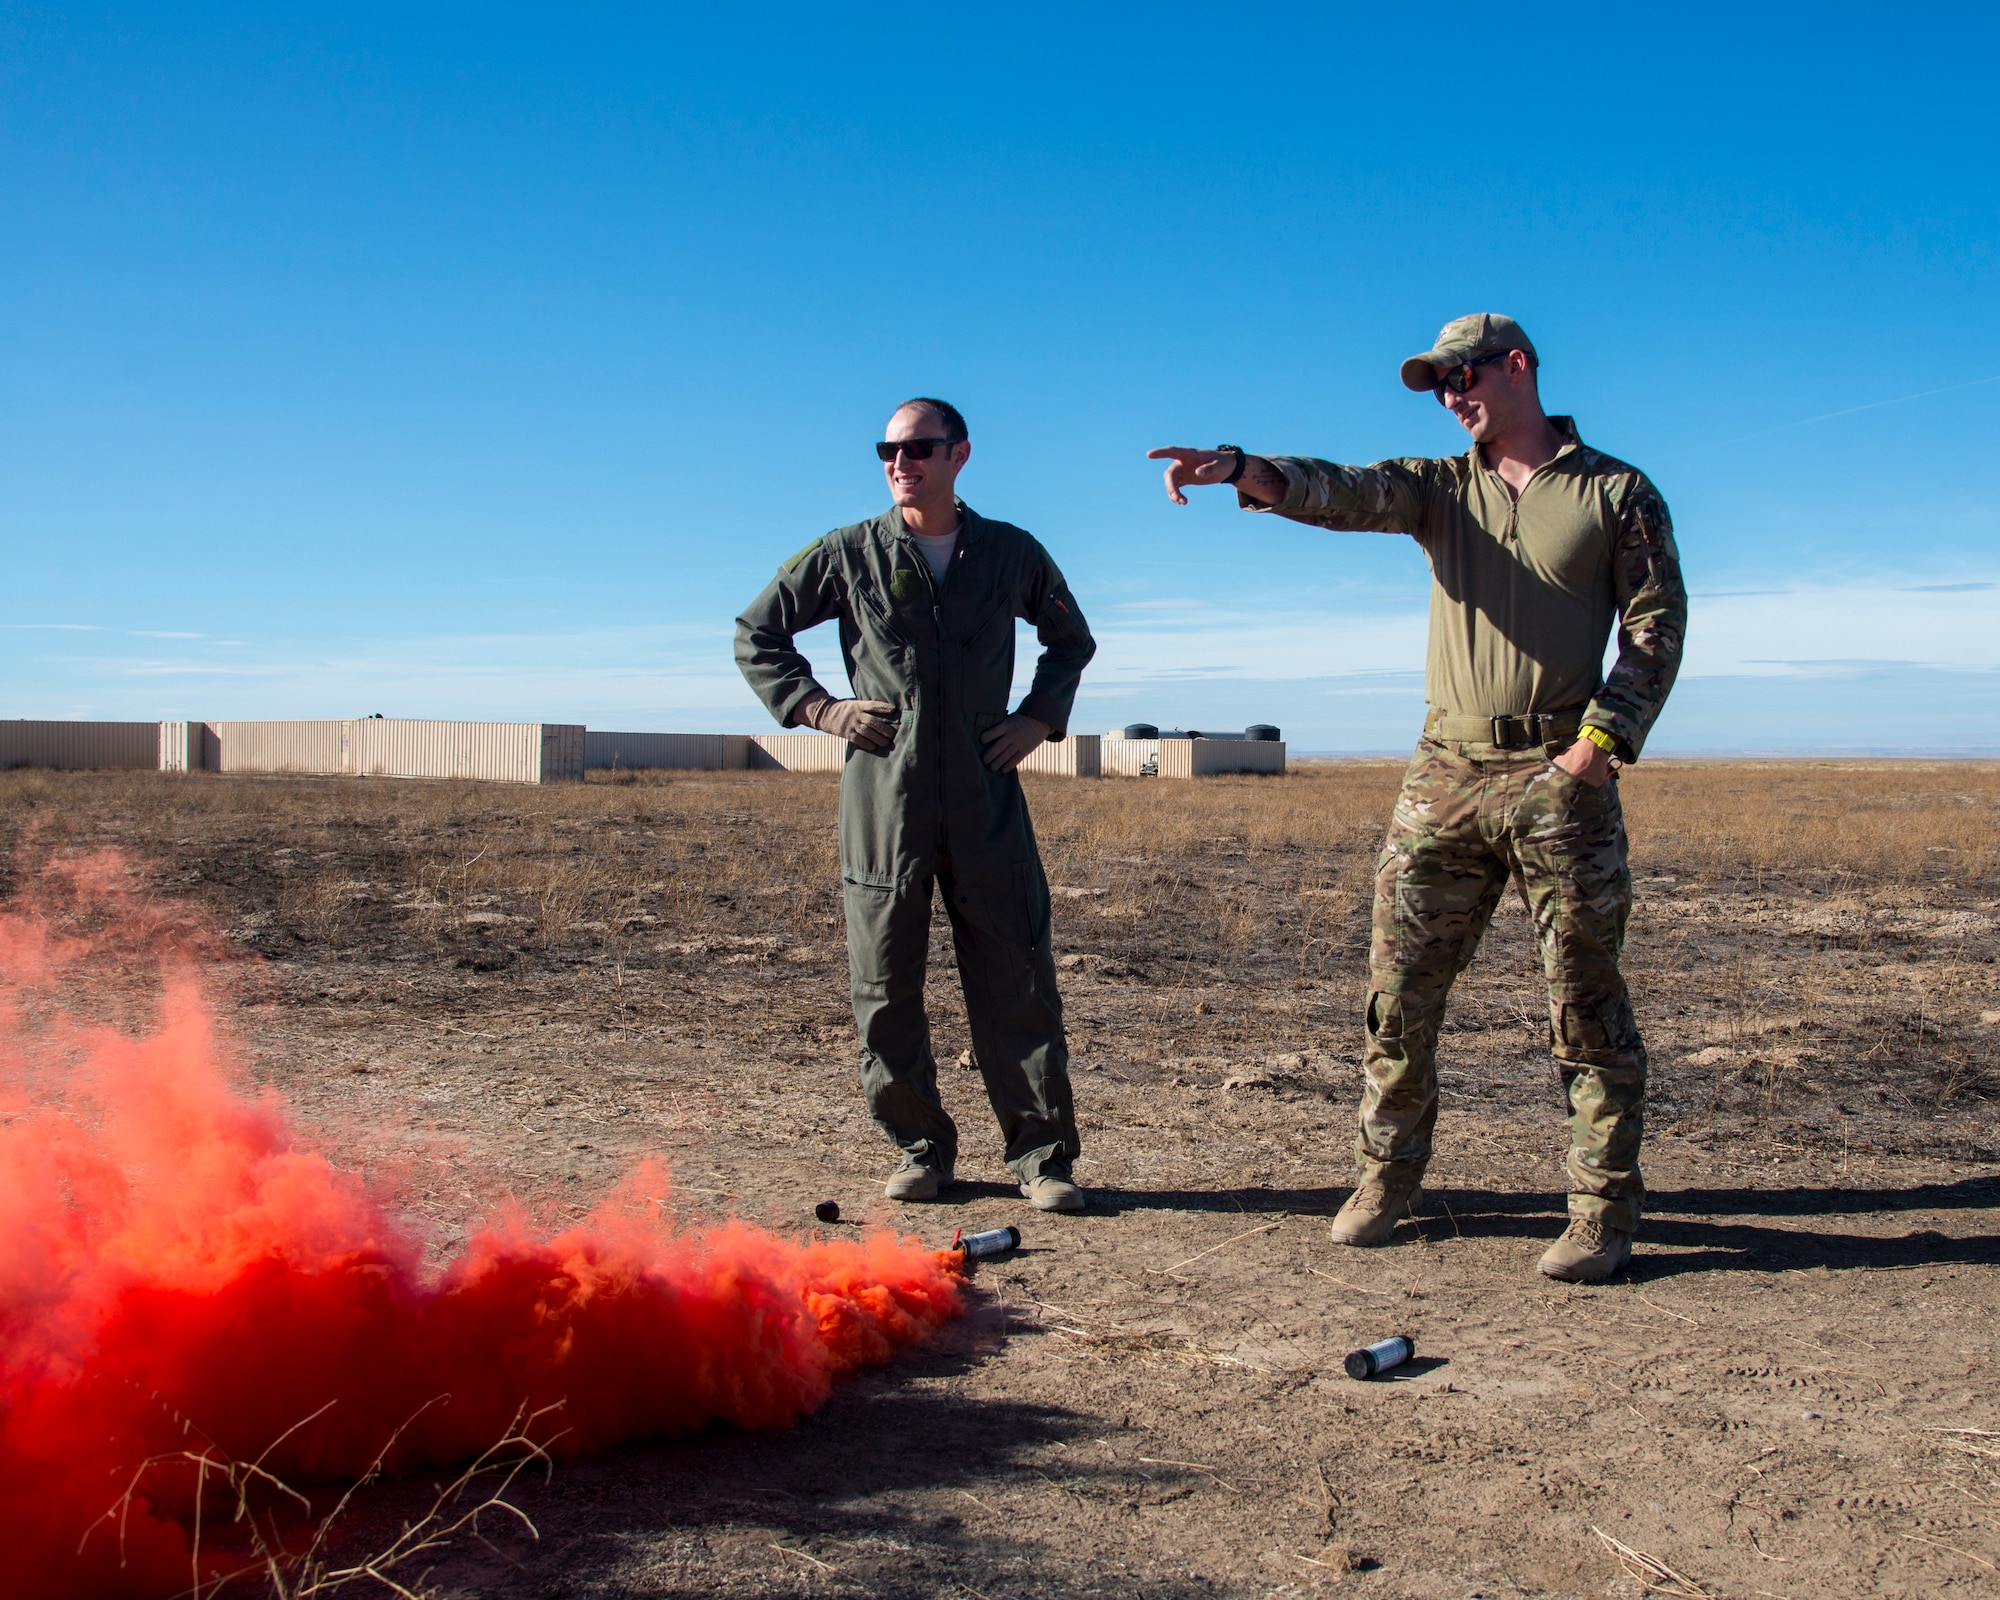 Staff Sgt. David Chorpeninng, 366th Fighter Wing survival, evasion, resistance and escape specialist, explains to Capt. Scott Hatter, 389th Fighter Squadron aircrew how to properly use a MK-124 marine smoke and illumination signal Sept. 26, 2019, at Saylor Creek Bombing Range, Idaho.